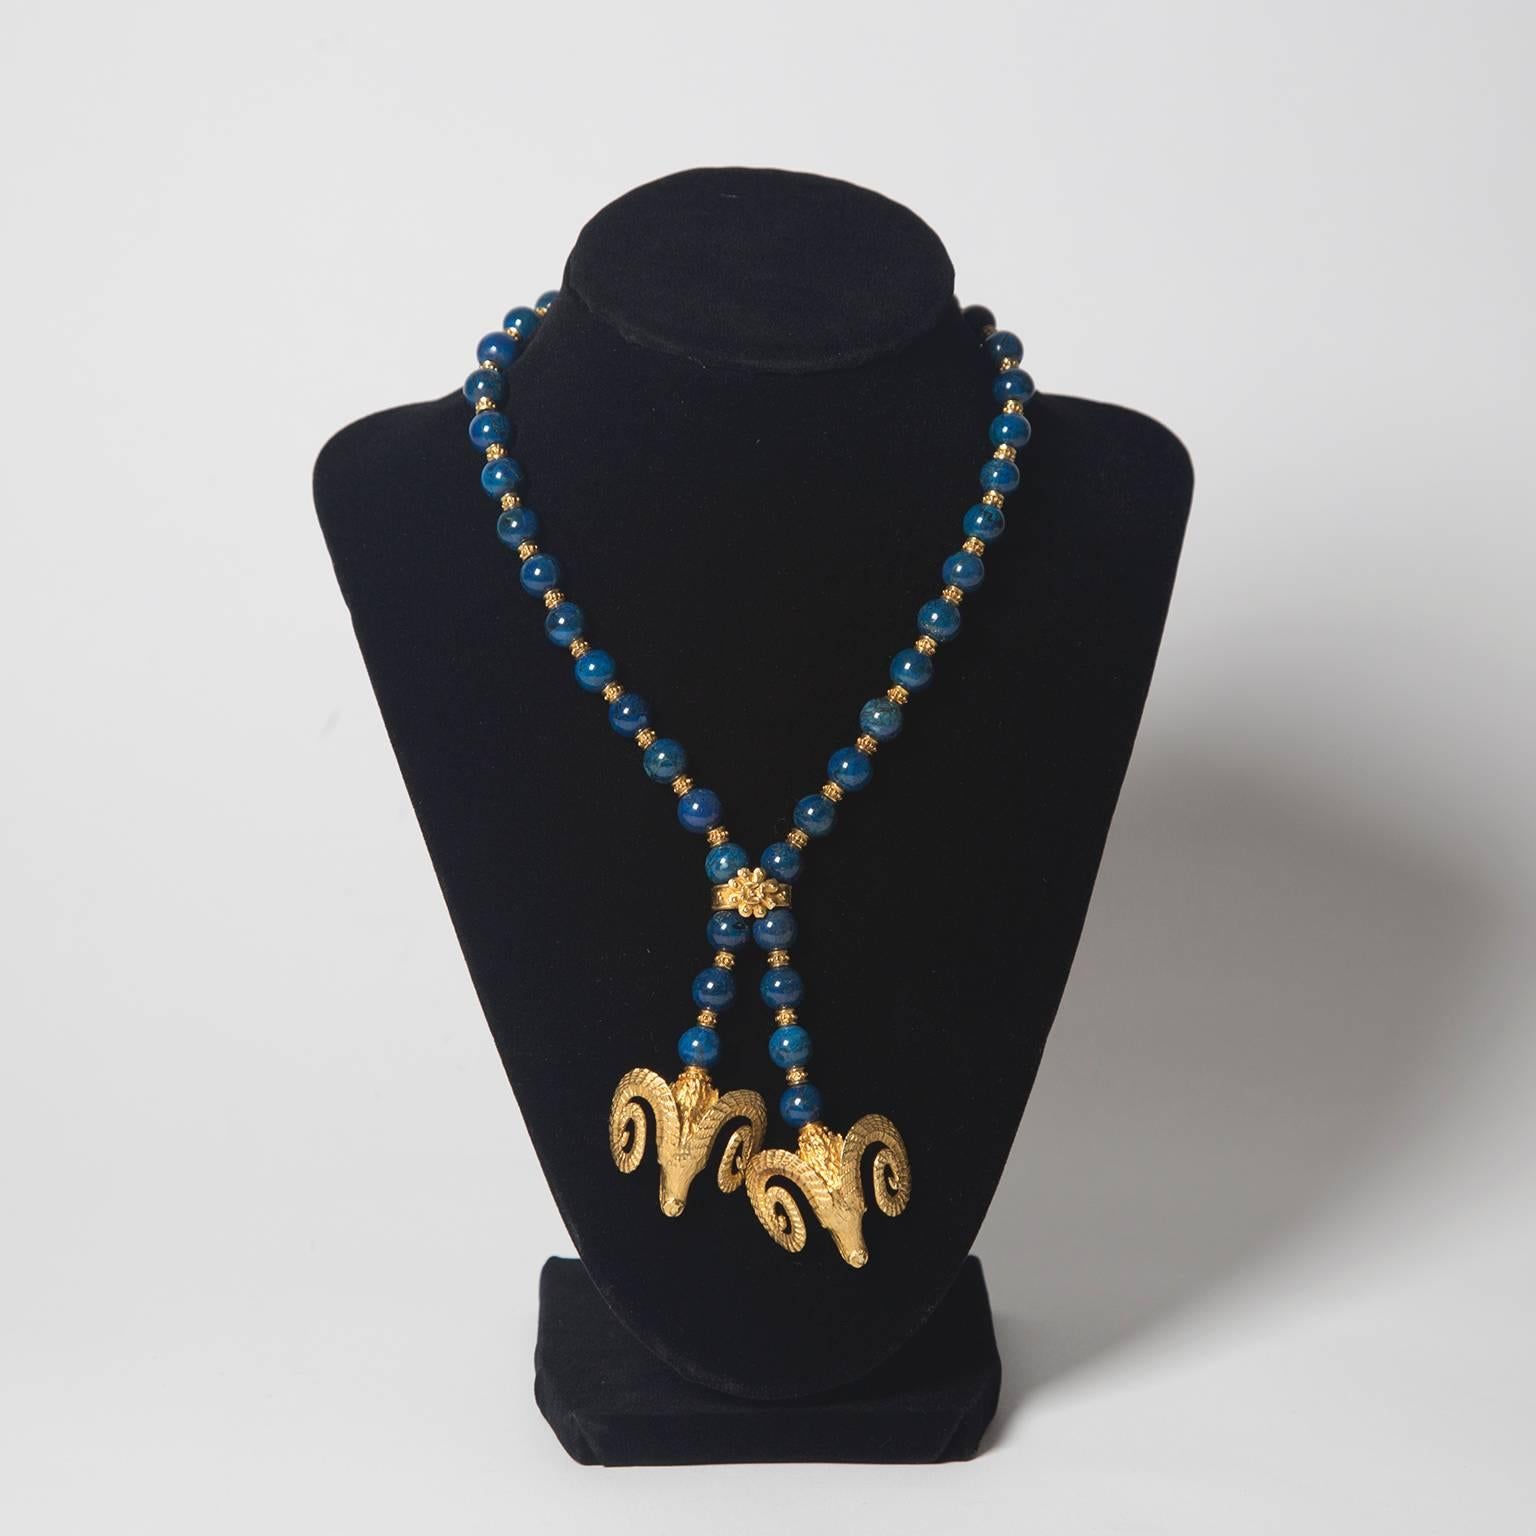 Beautiful lapis necklace inspired by a Grecian lariat style. Joined by a gold flower motif and conclude with two hanging ram heads, both in solid 18K gold. 